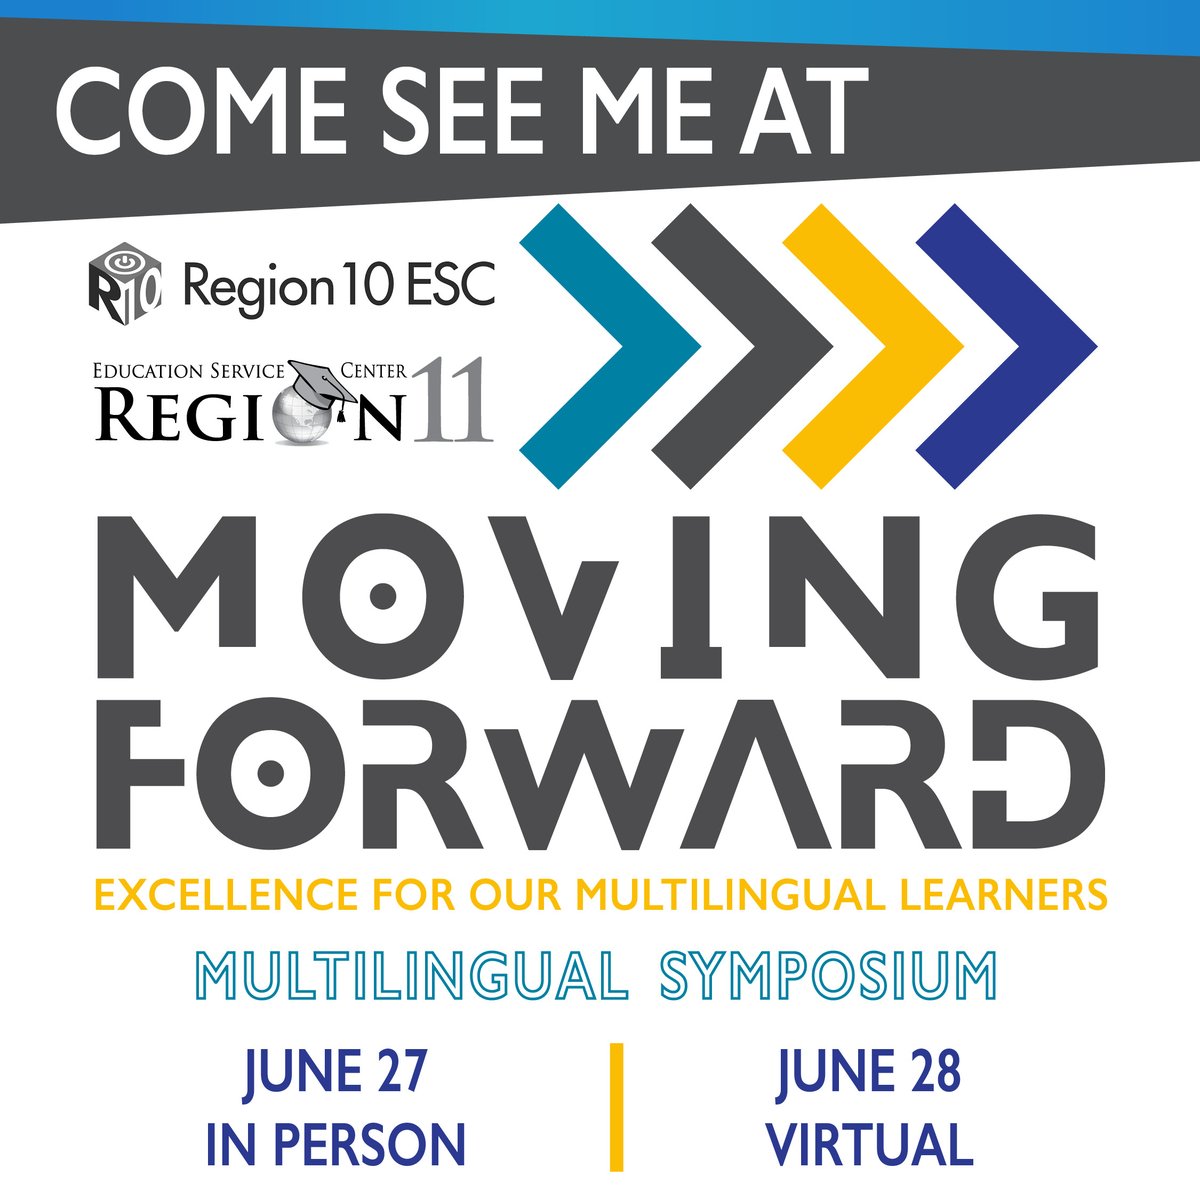 Join us at the 2023 Multilingual Symposium on June 27th! 🎉 Discover the power of Big Books, by George! and elevate multilingual education. Visit our booth and let's connect.  @R10Multilingual @ESC11Bil ESL

#R10Multilingual #MovingForward #BigBooksByGeorge